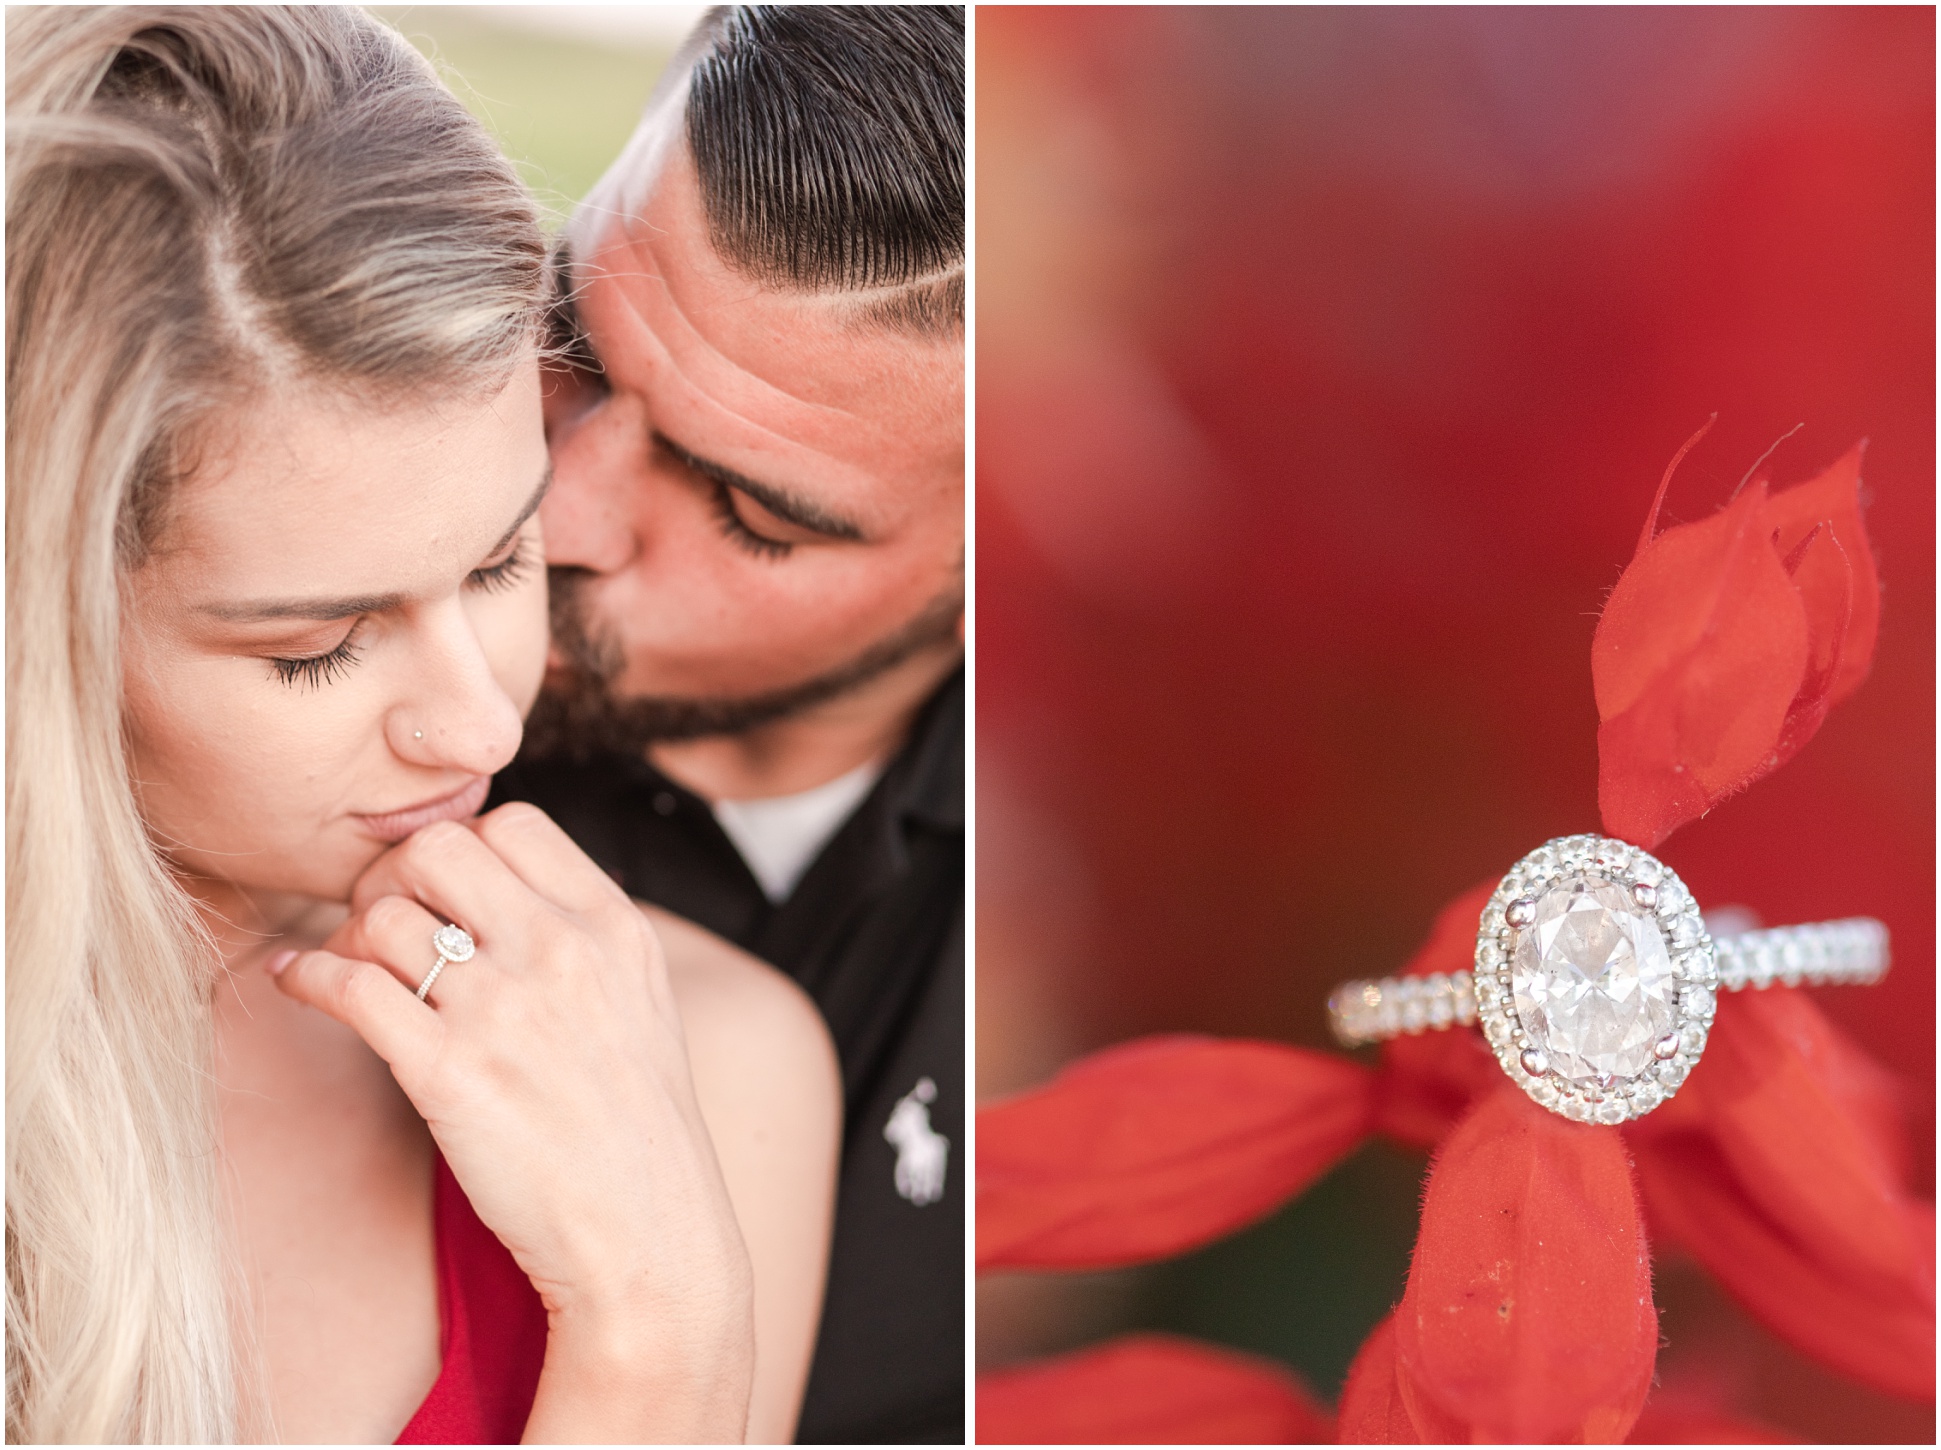 Bobby kissing Landry from behind and her oval engagement ring on a red flower